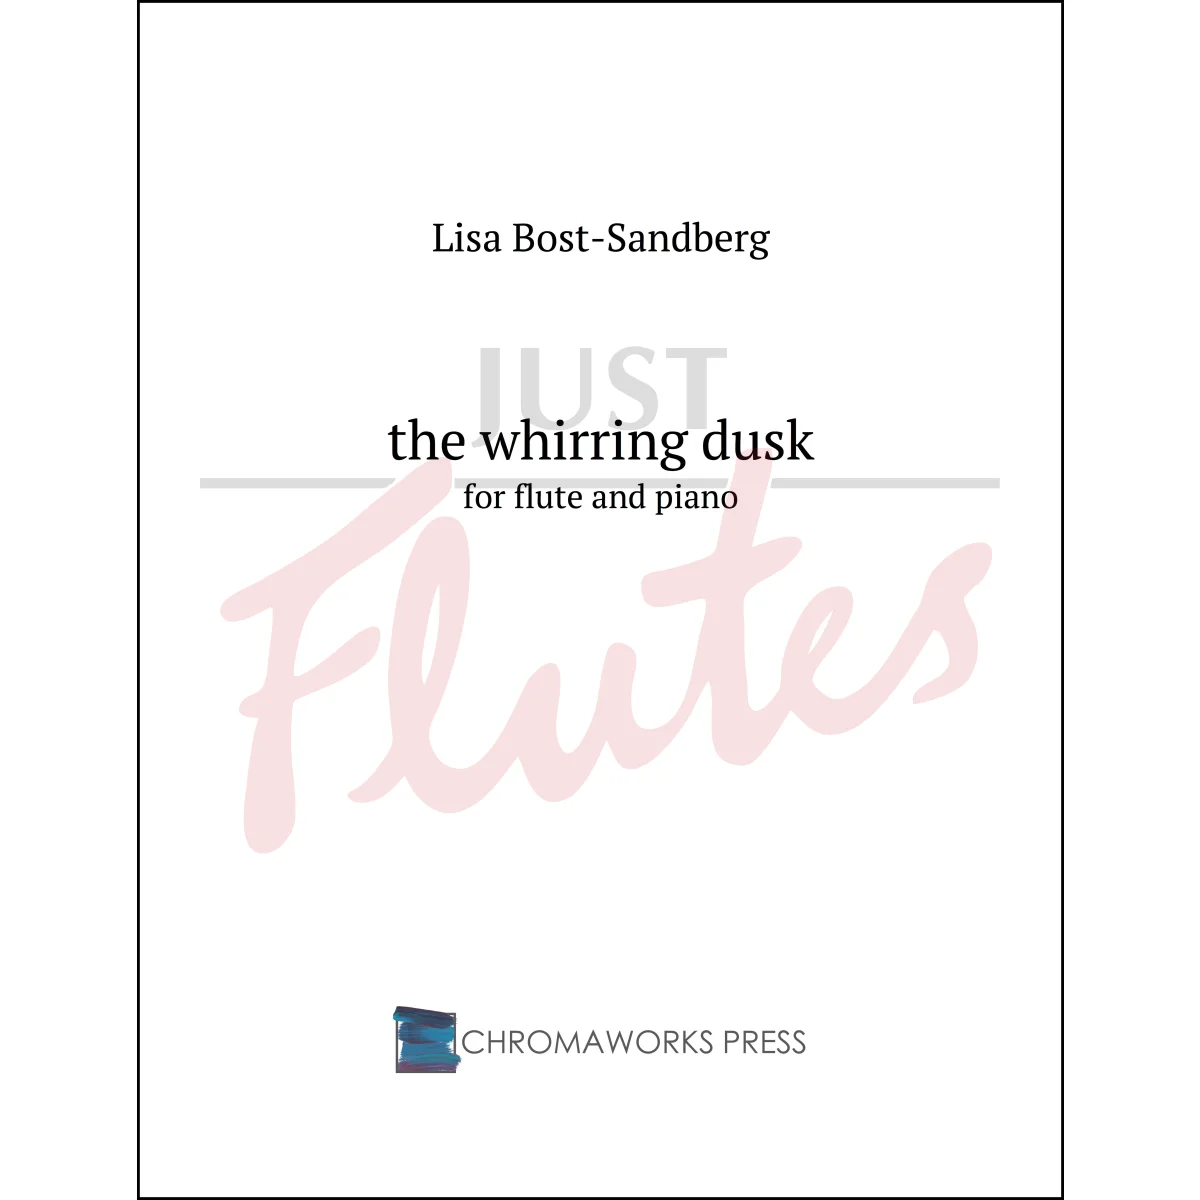 The Whirring Dusk for Flute and Piano